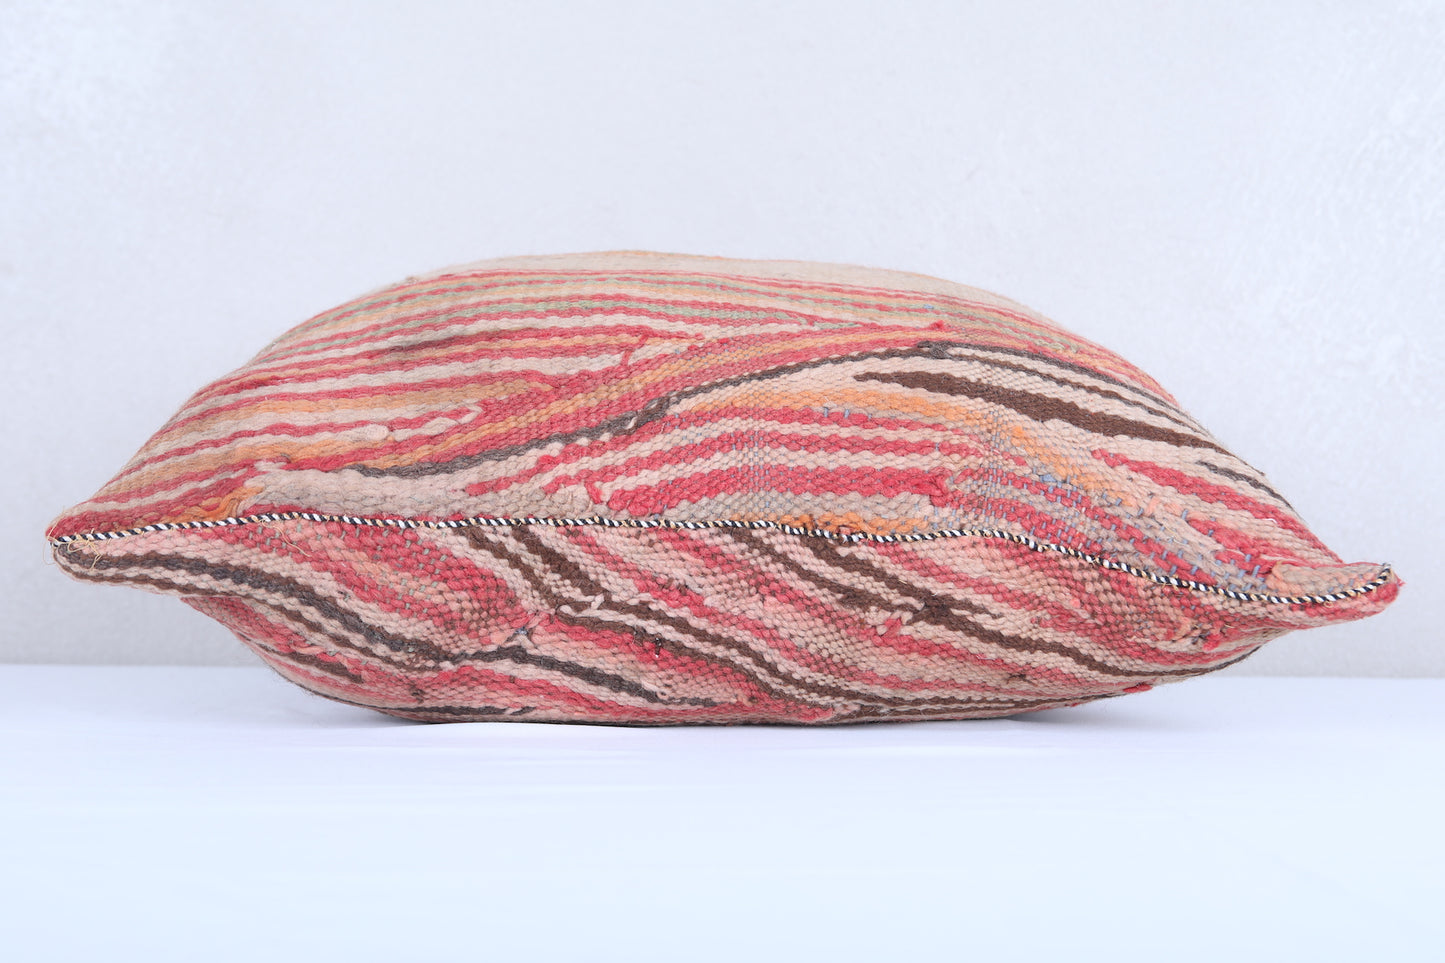 Vintage moroccan handwoven kilim pillow 16.5 INCHES X 19.2 INCHES